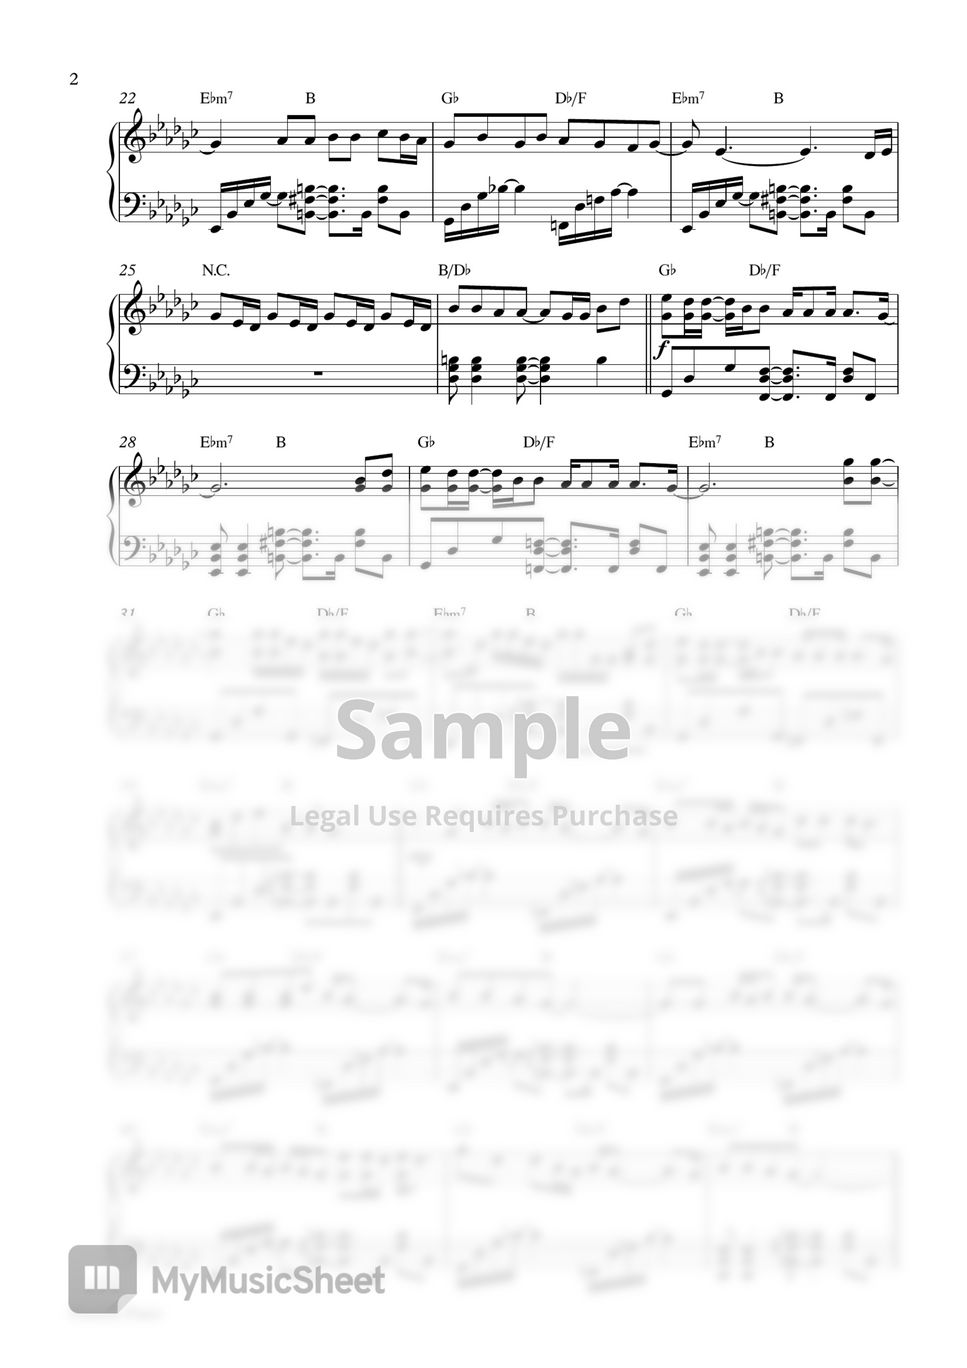 Justin Bieber ft. Chance The Rapper - Holy (Piano Sheet) by Pianella Piano